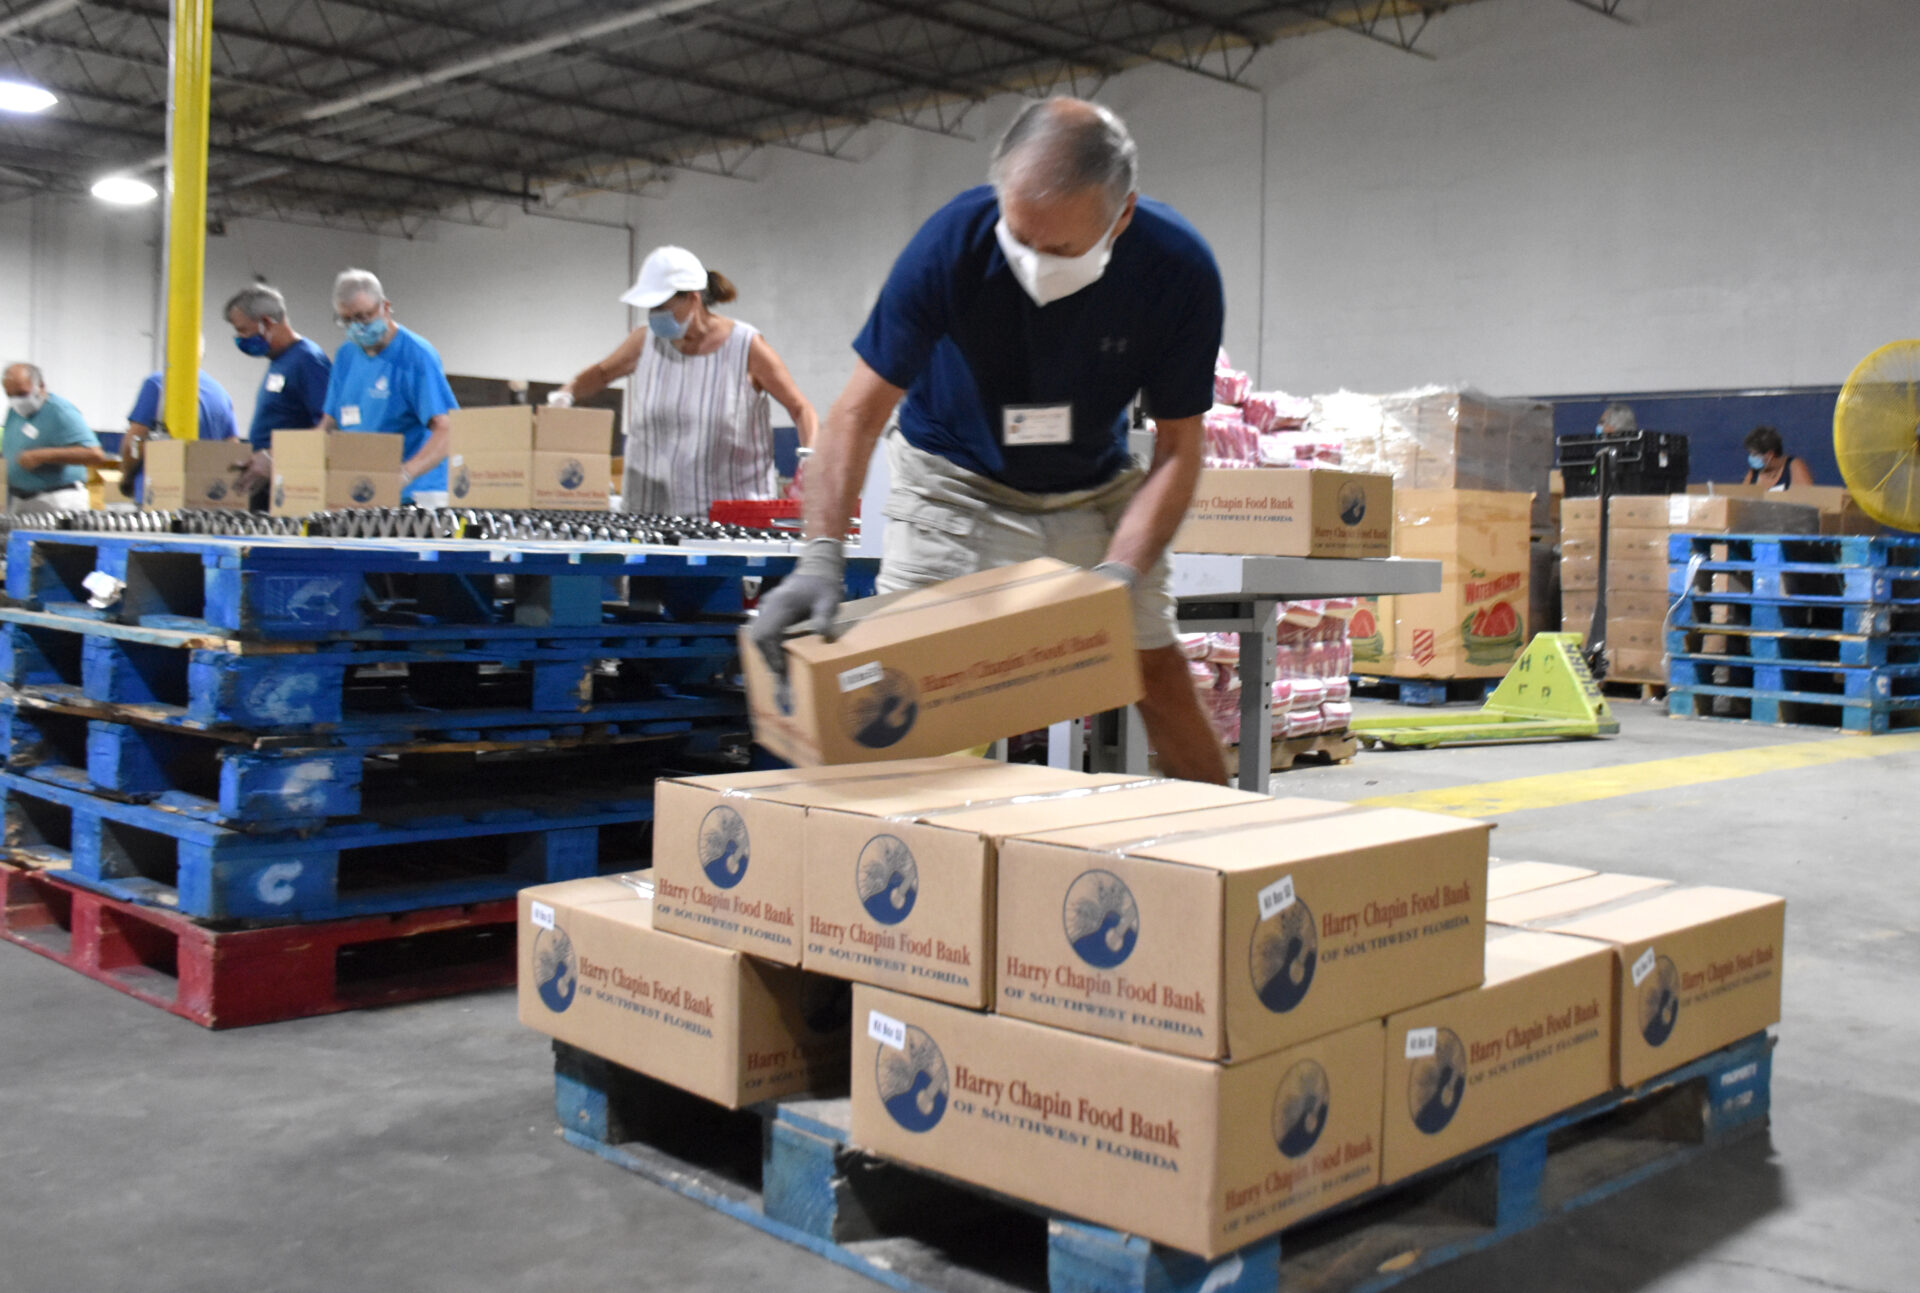 Why and How to Volunteer Harry Chapin Food Bank